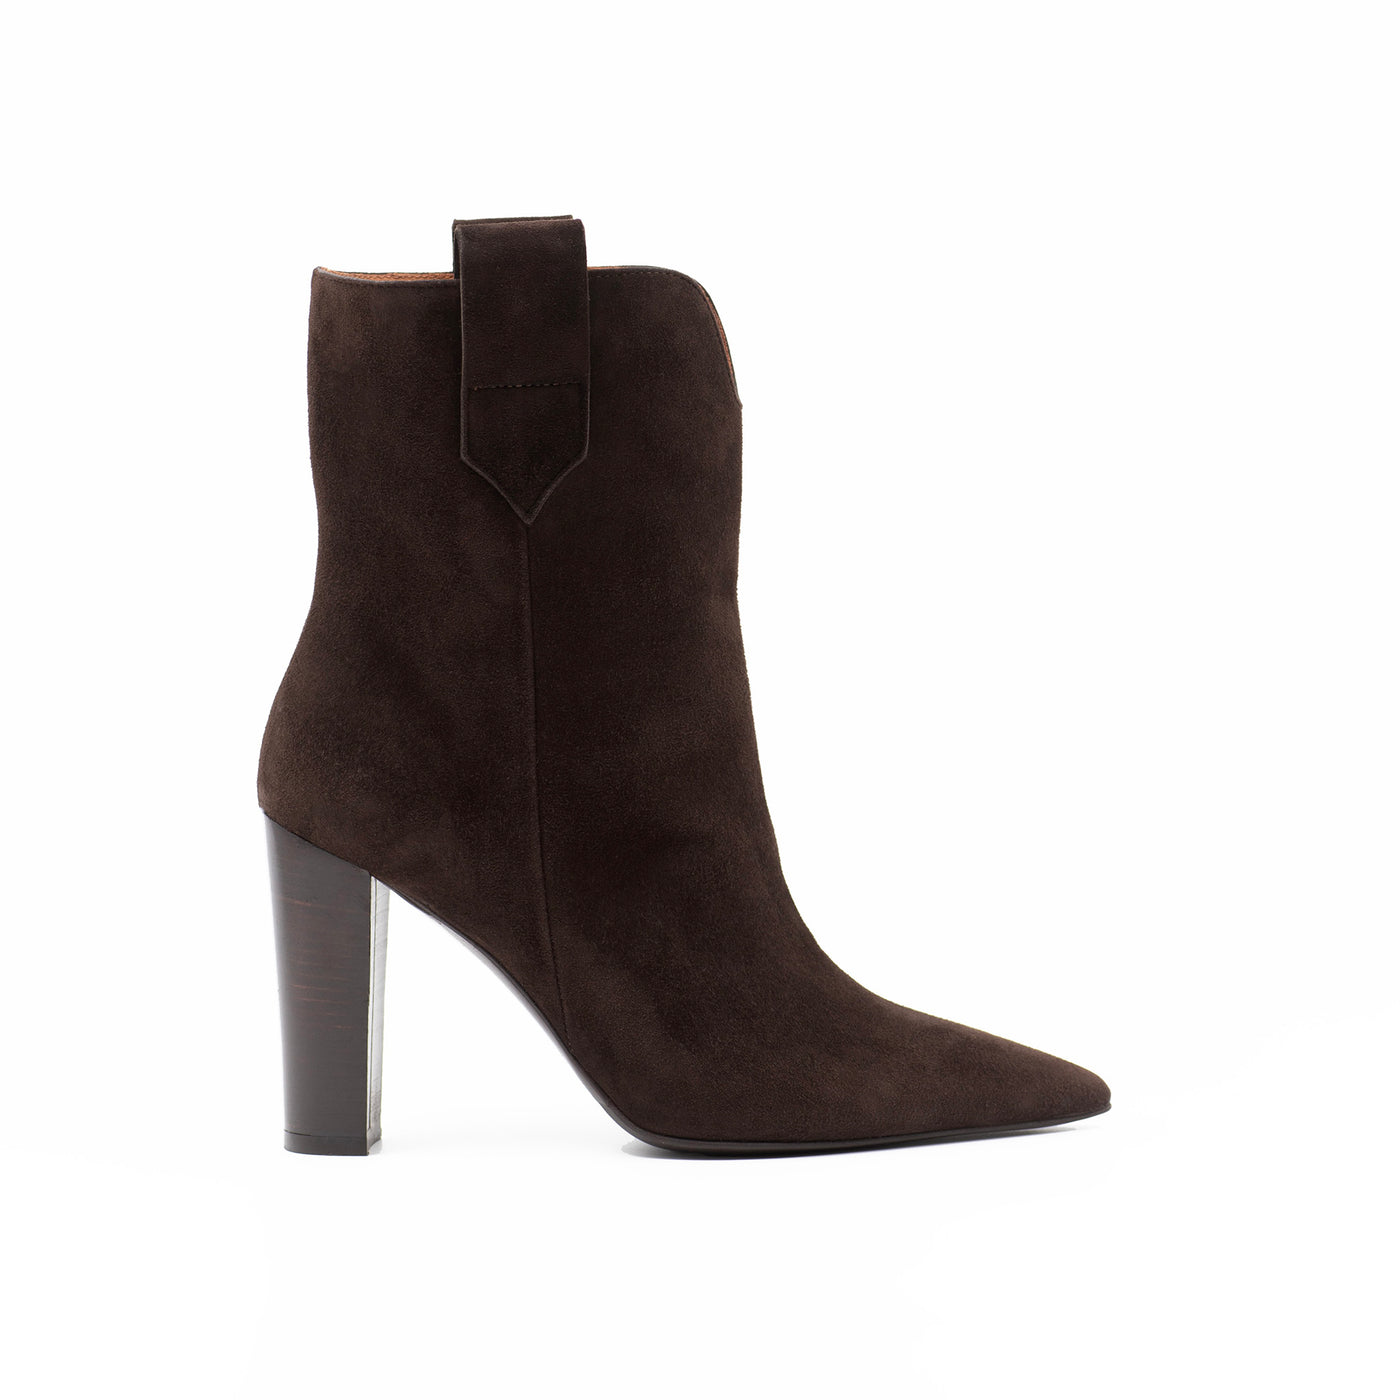 Western inspired ankle boots in brown suede with block heel